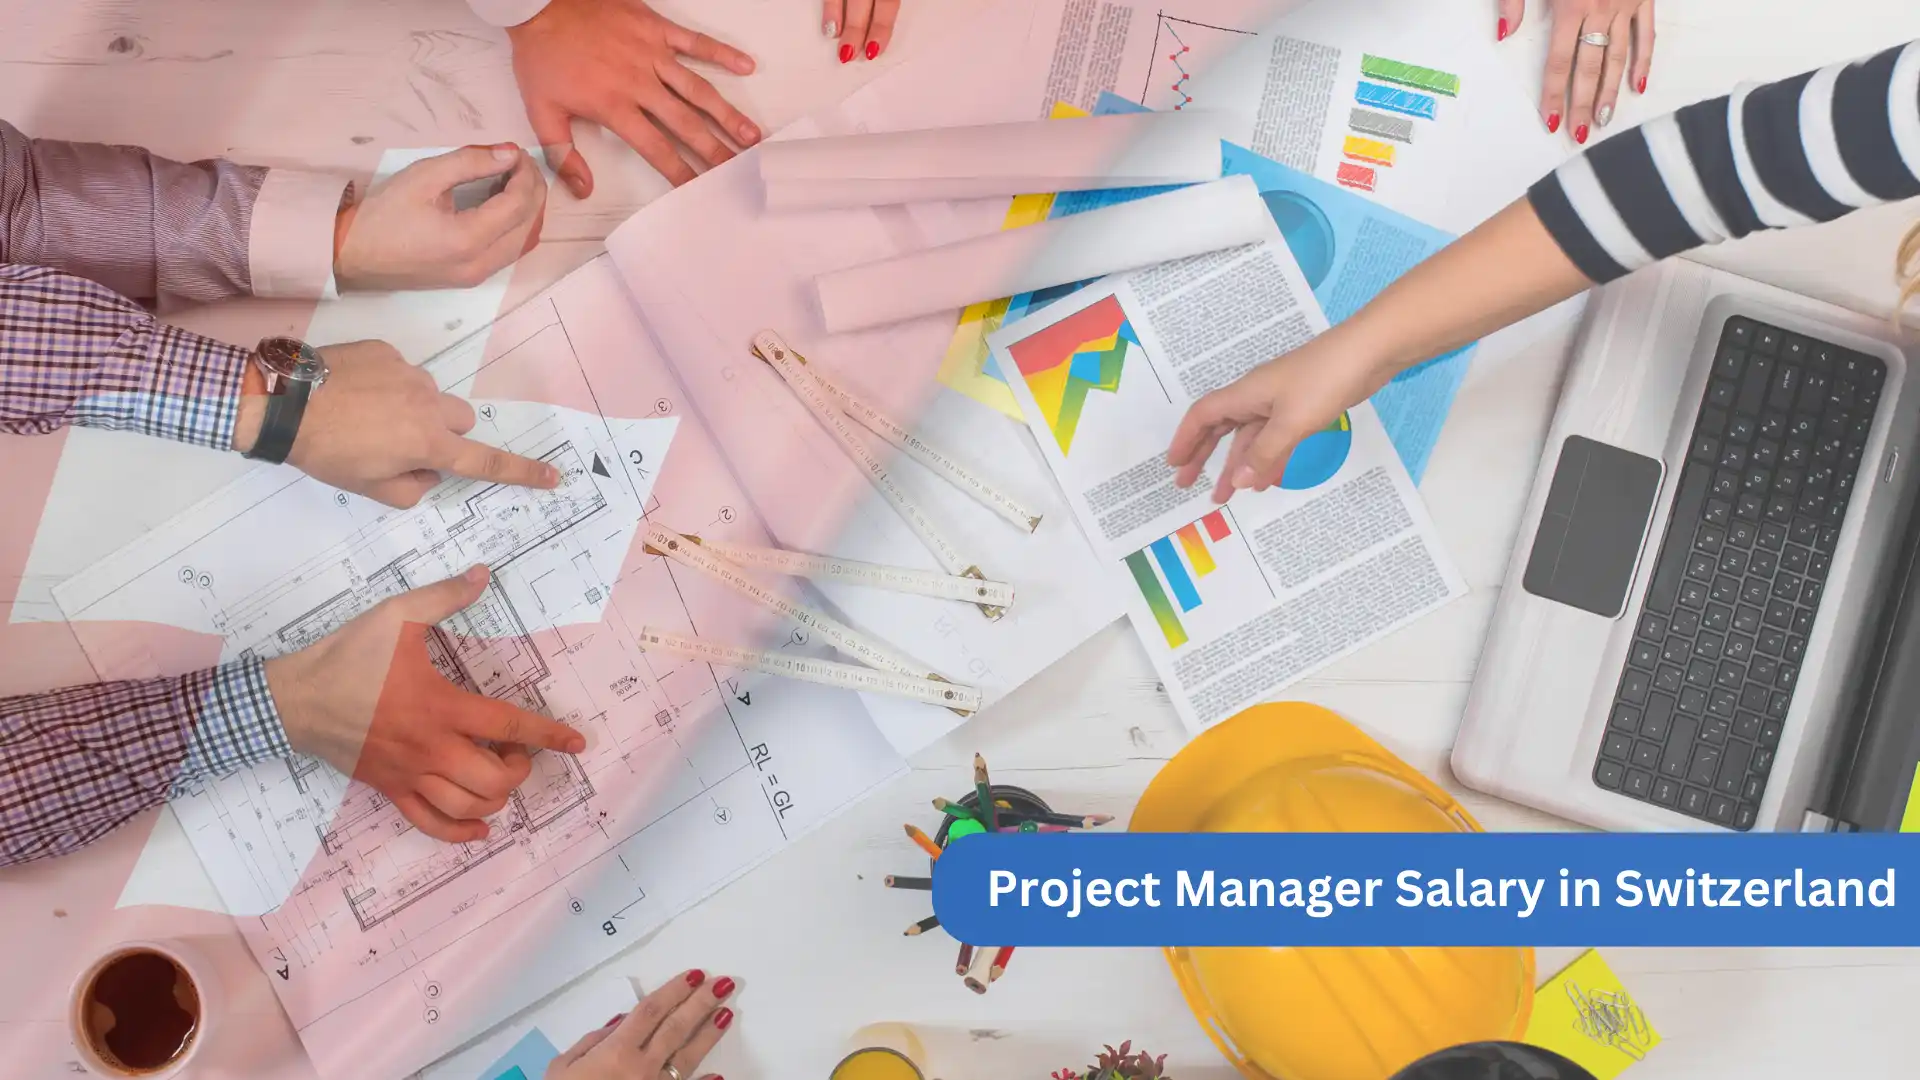 Project Manager Salary in Switzerland